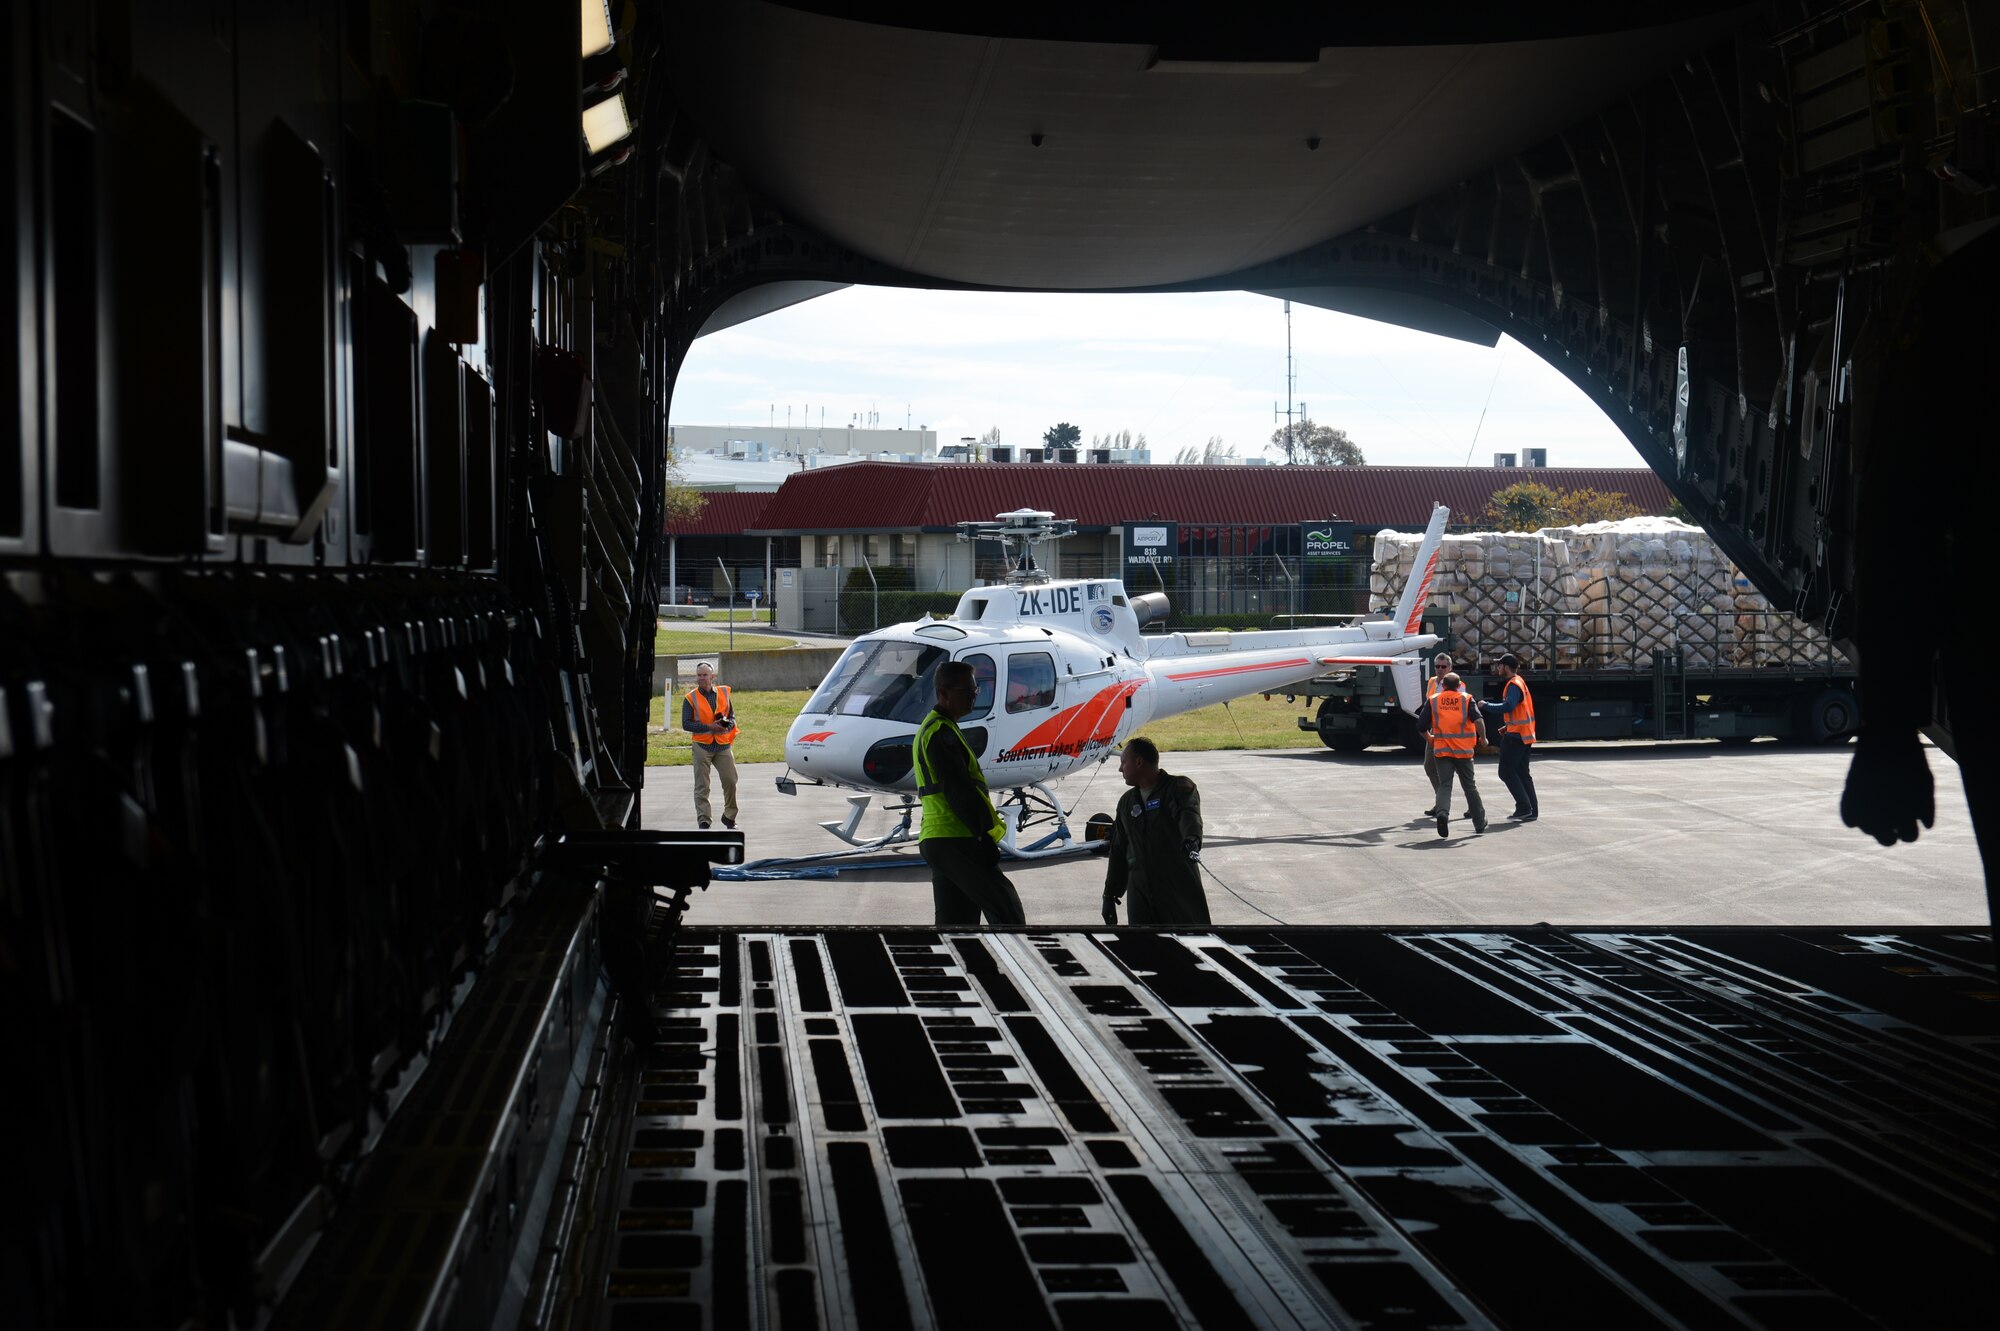 An Eurocopter AS350 B2 single engine helicopter without its blades attached, along with pallets of cargo are staged behind a McChord Field C-17 Globemaster III aircraft prior to being loaded, Oct. 8th, 2014 at Christchurch, New Zealand. The helicopter was transported along with the cargo and 62 passengers to McMurdo Station, Antarctica in support of Operation DEEP FREEZE. (U.S. Air Force photo/Master Sgt. Todd Wivell)